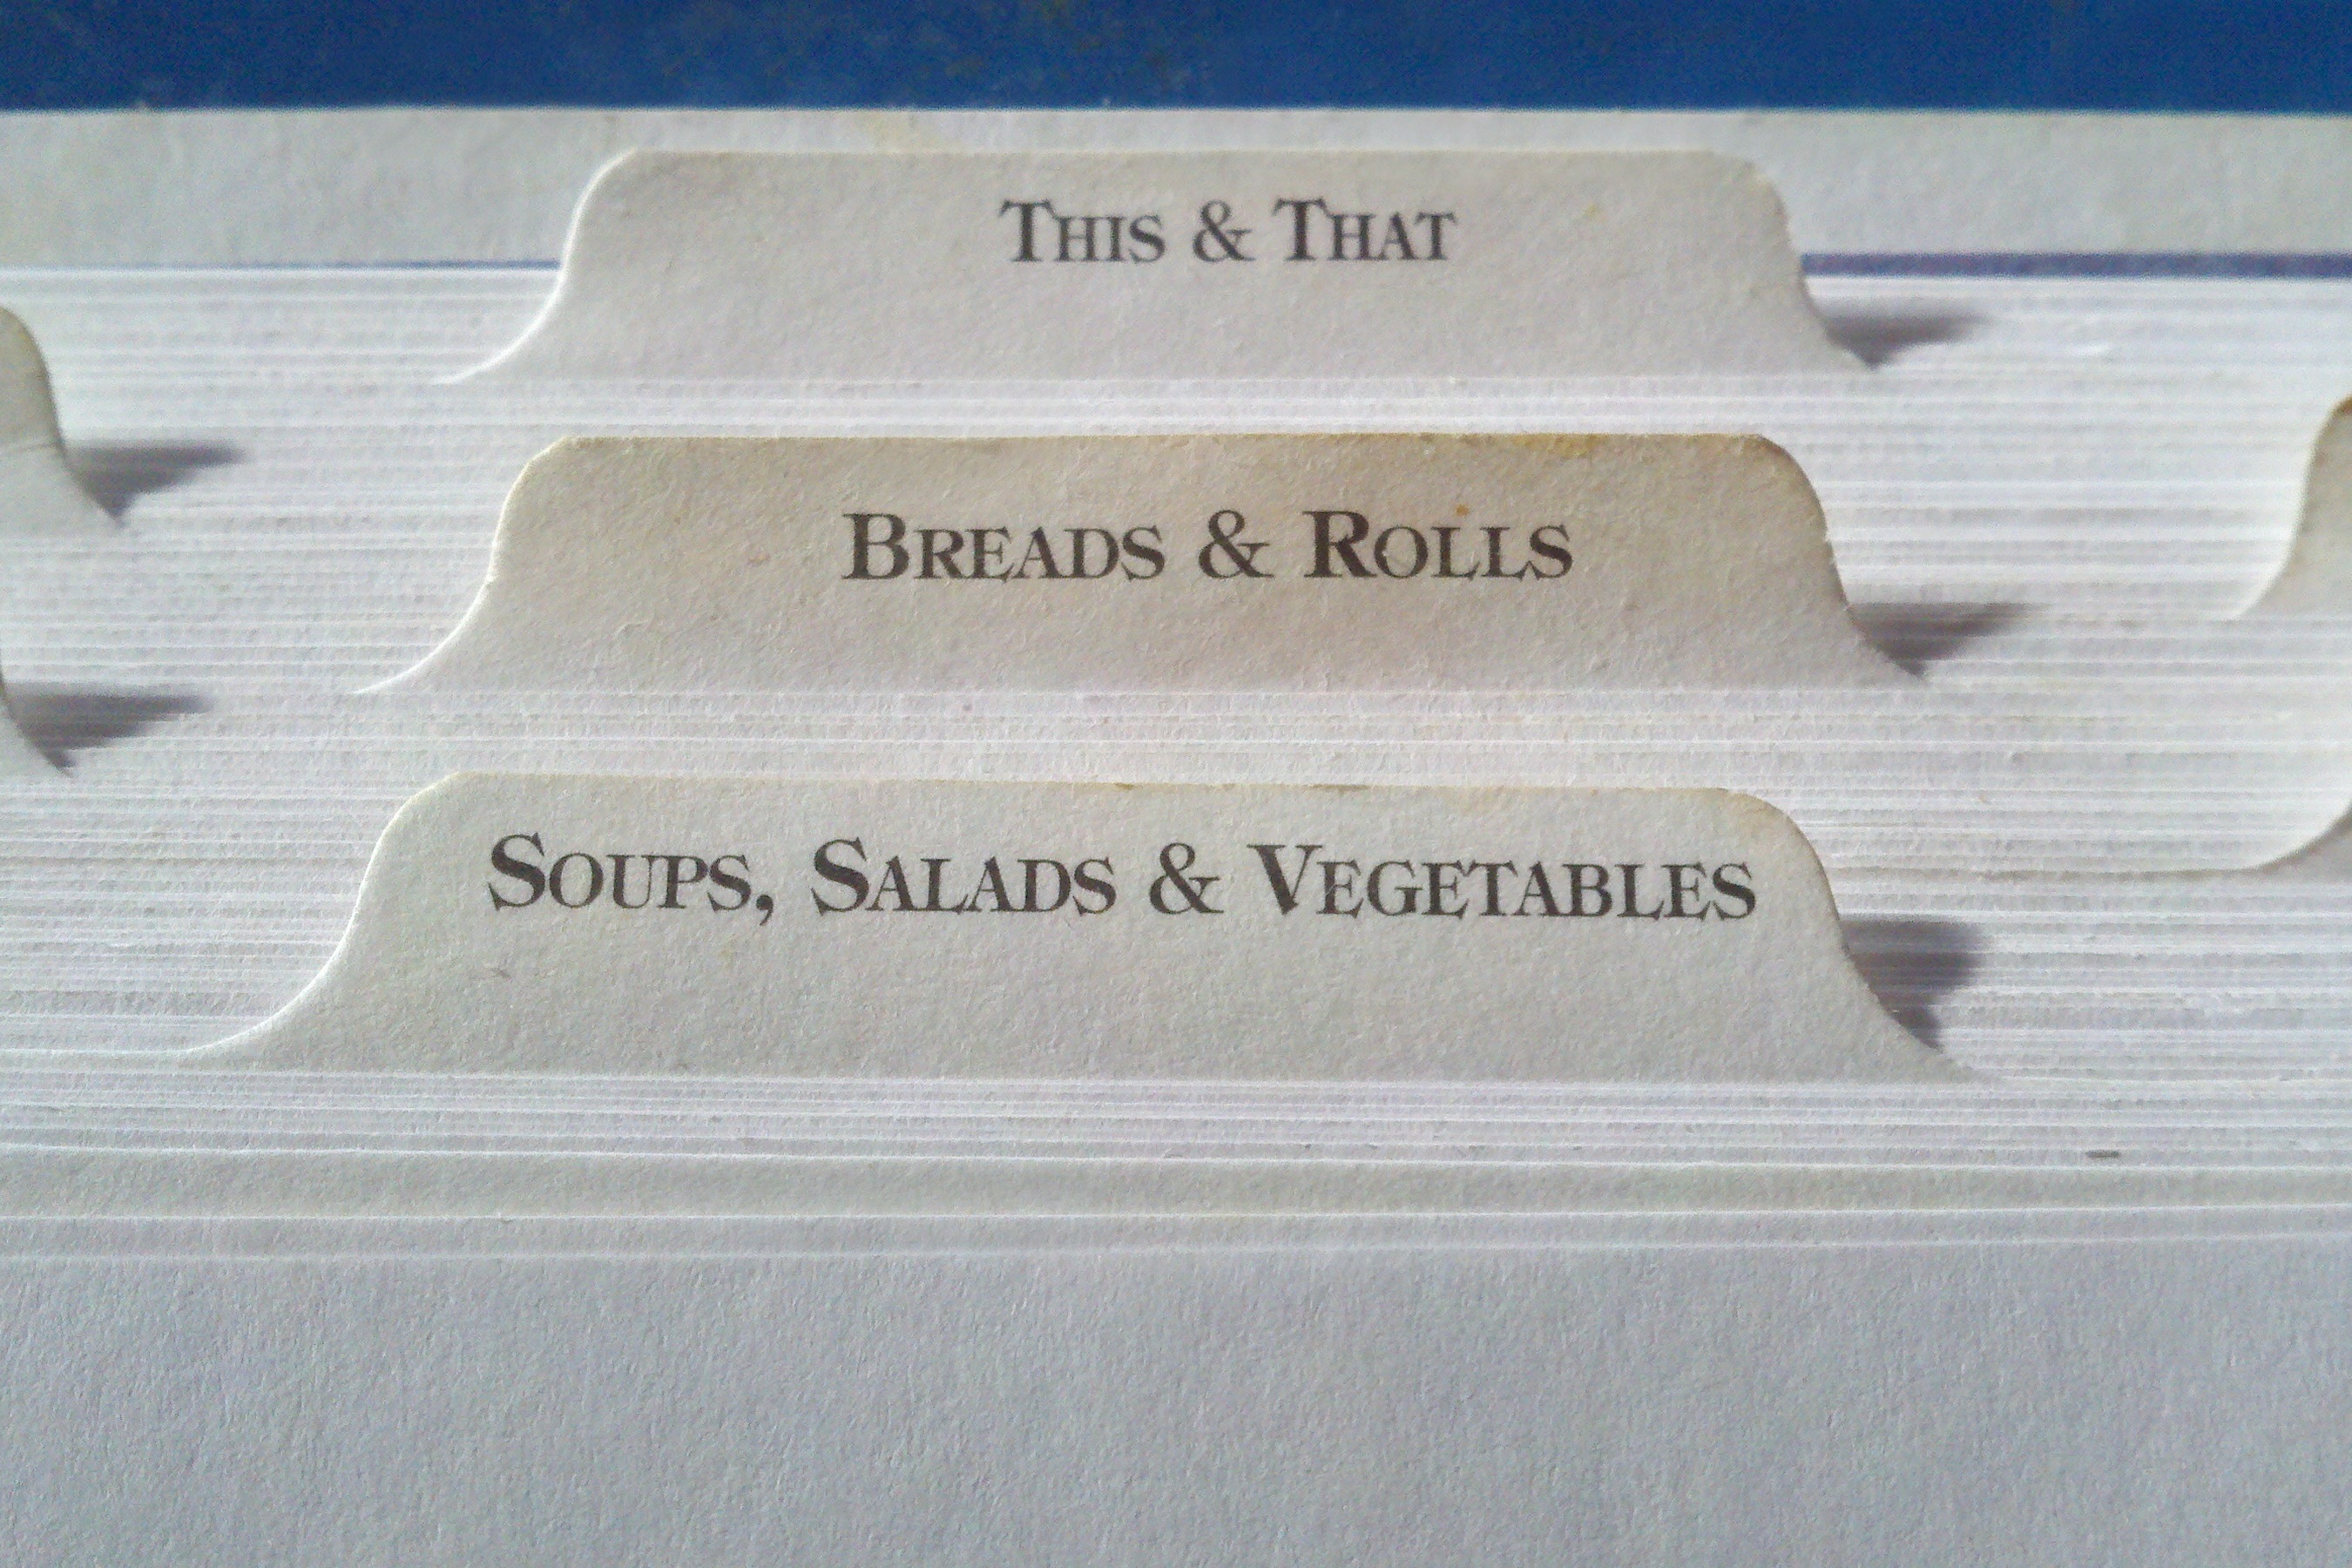 white this&that; beads&rolls; soups, salads & vegetables labeled files